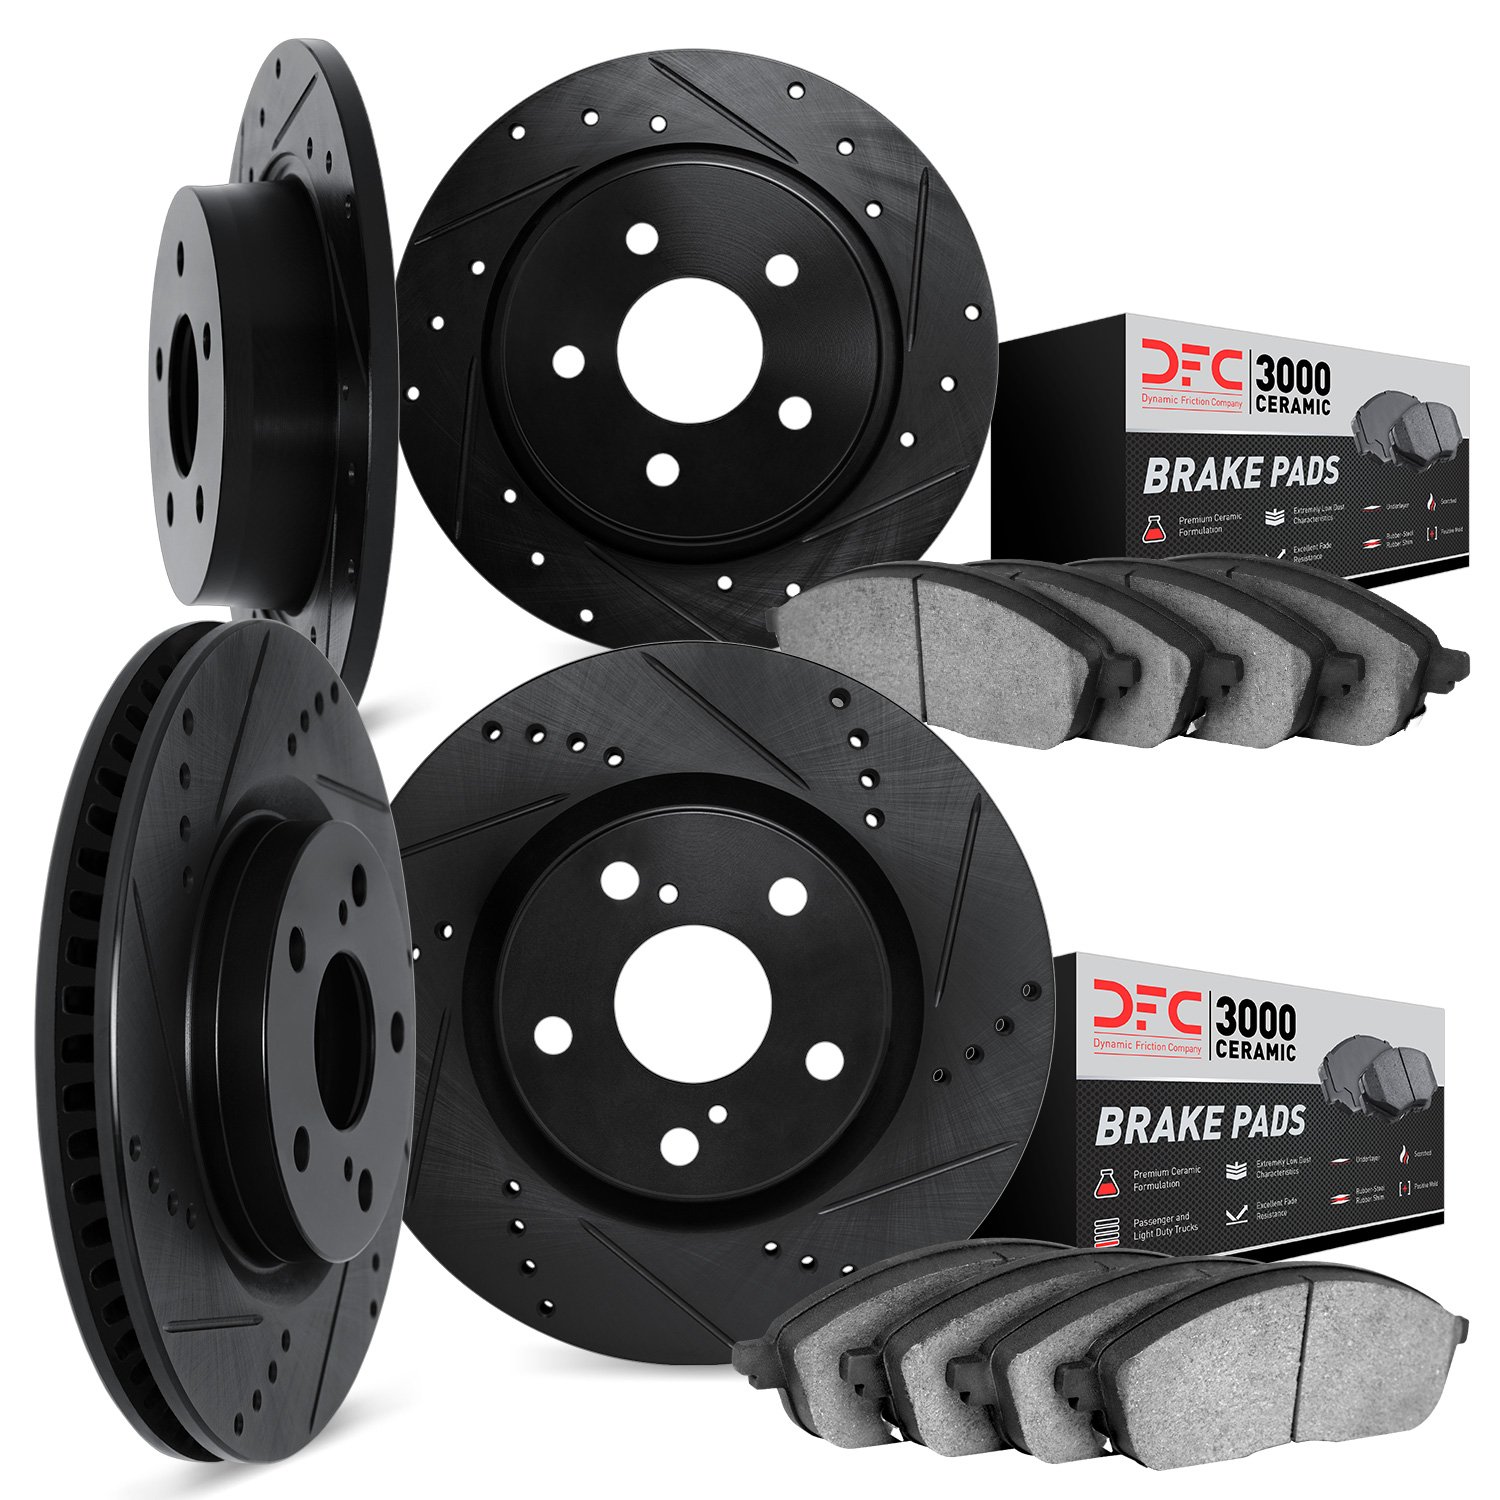 8304-59035 Drilled/Slotted Brake Rotors with 3000-Series Ceramic Brake Pads Kit [Black], 2013-2017 Acura/Honda, Position: Front